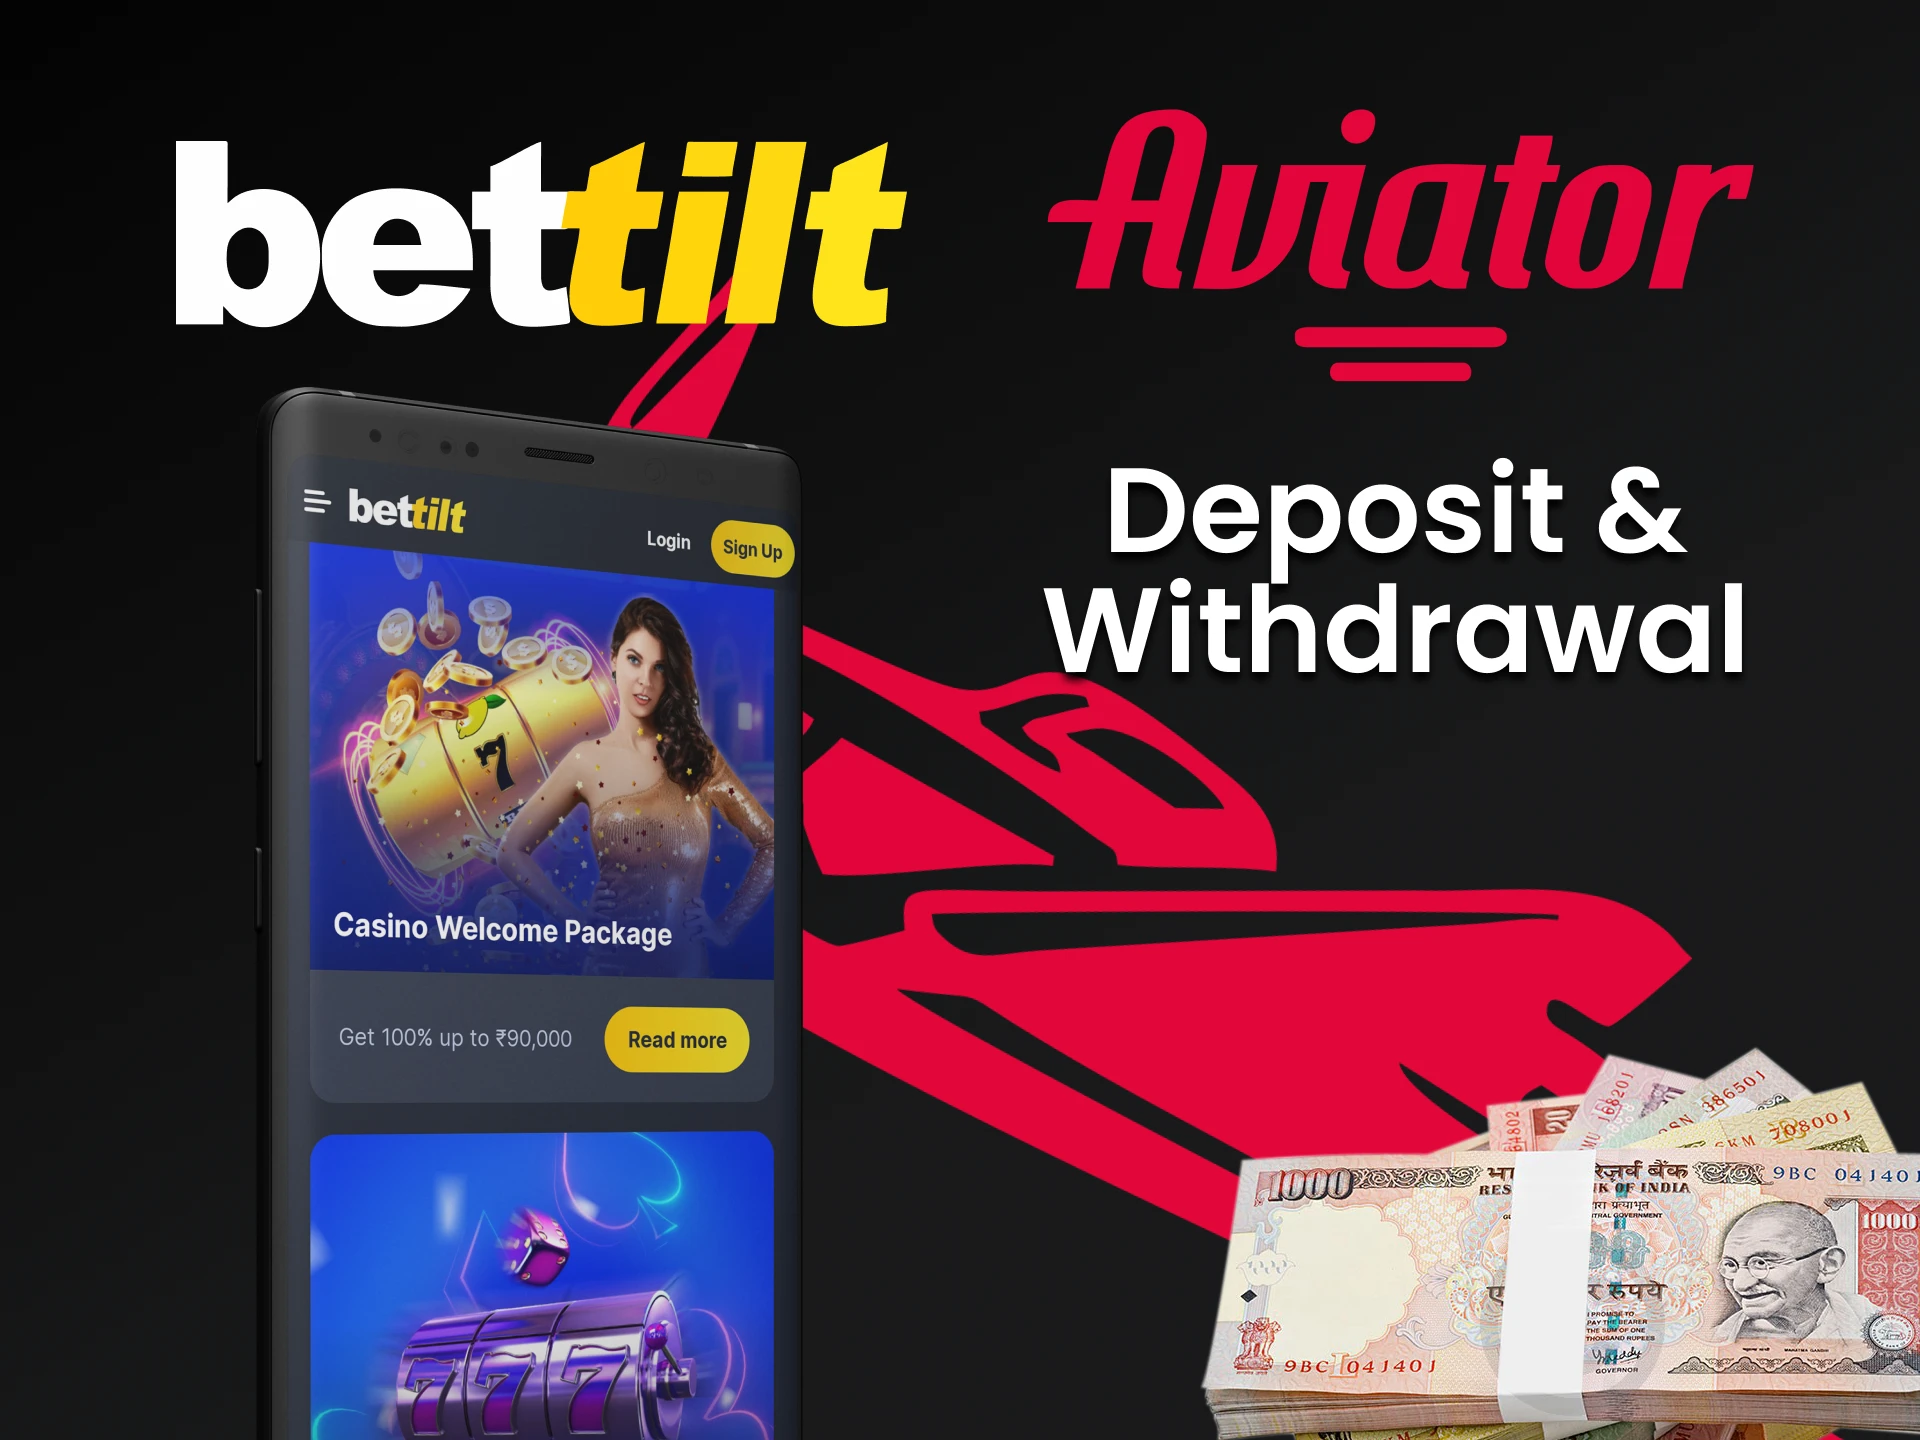 Deposit and withdraw money at Bettilt without problems.